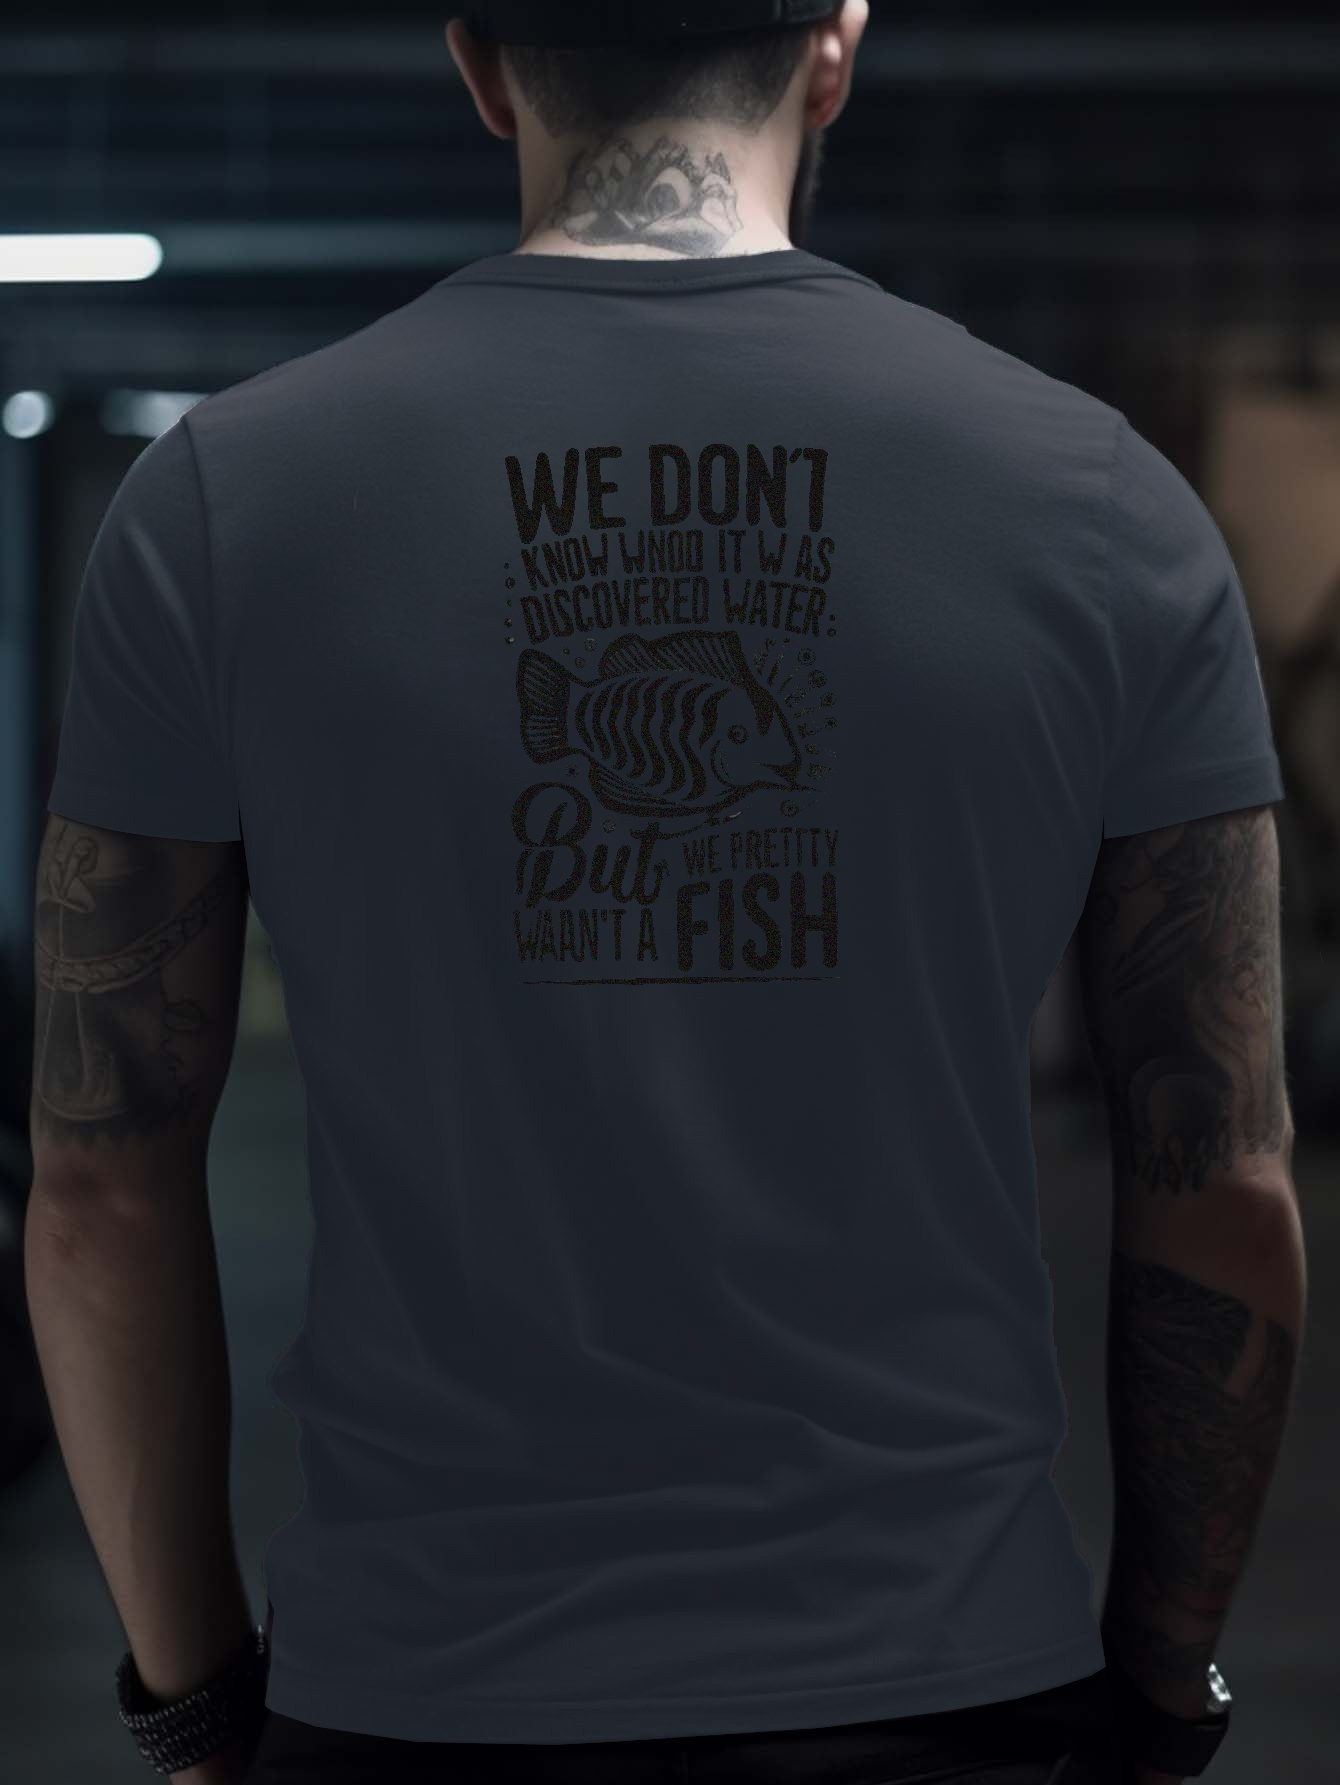 Fish Print Men's Short Sleeve T-shirts, Comfy Casual Breathable Tops For Men's Fitness Training, Jogging, Outdoor Activities